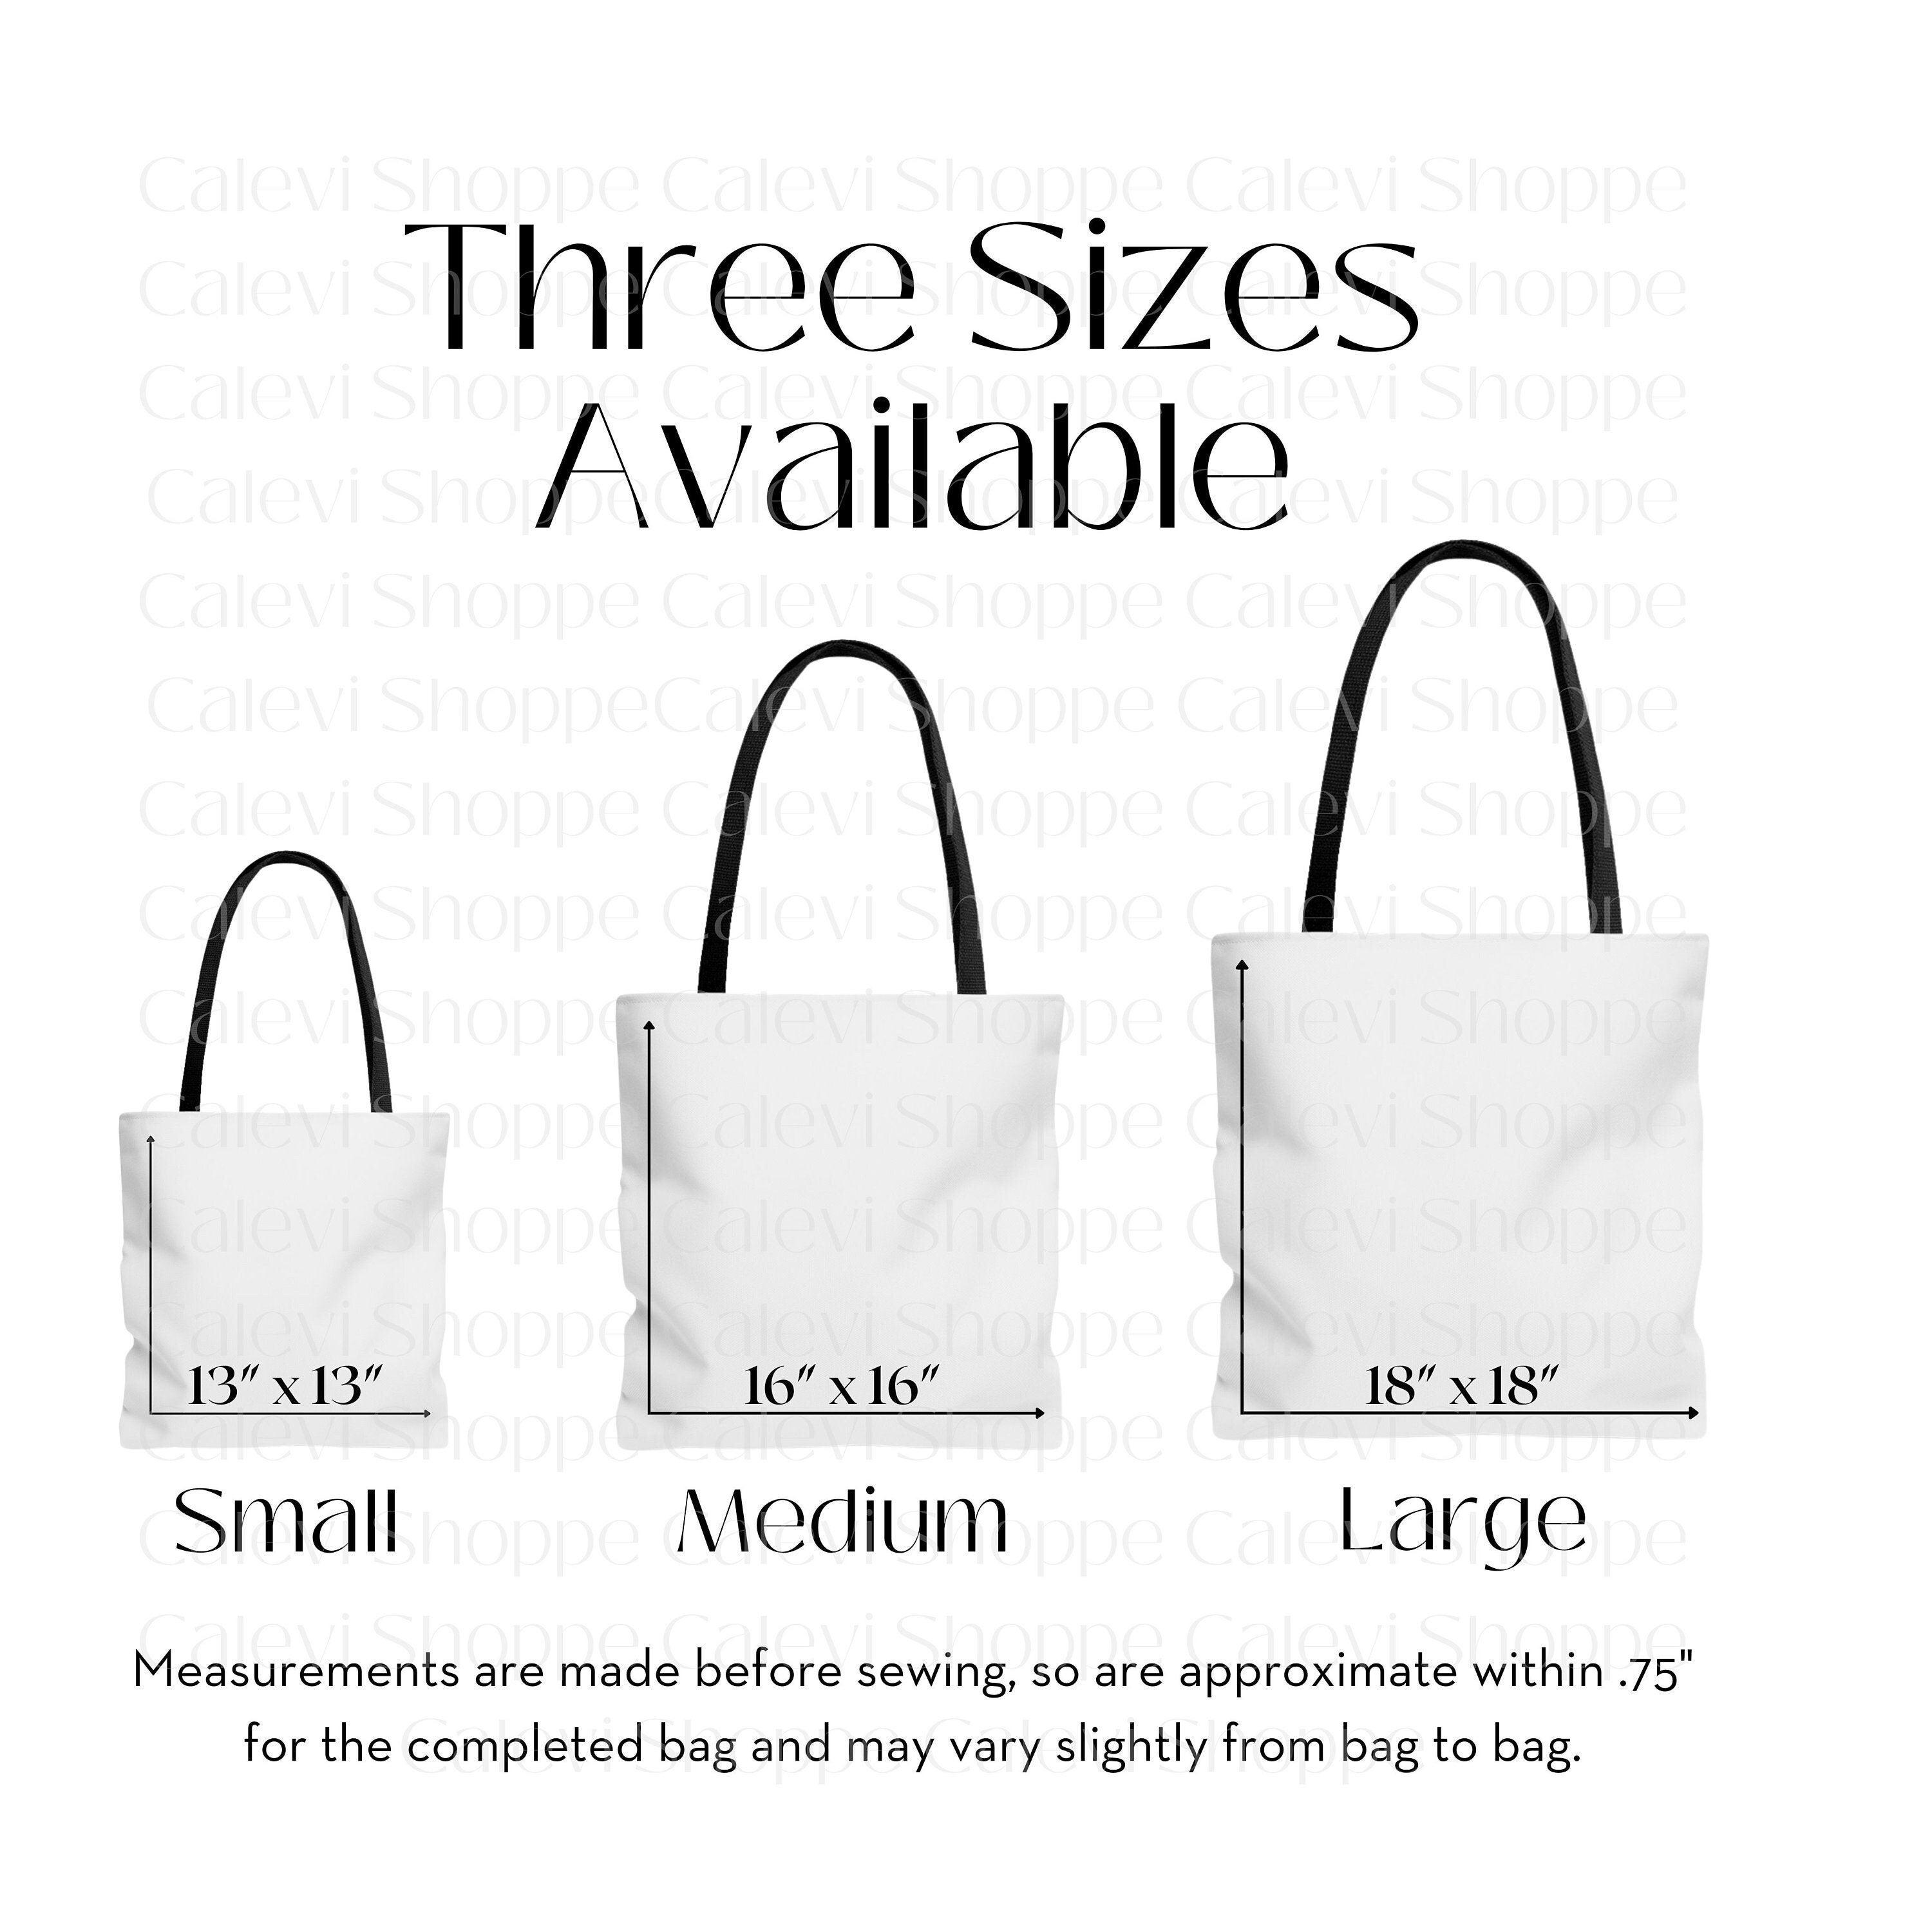 Tote Bag Size Chart, AOP Tote Size Chart, Sizing Chart for Tote